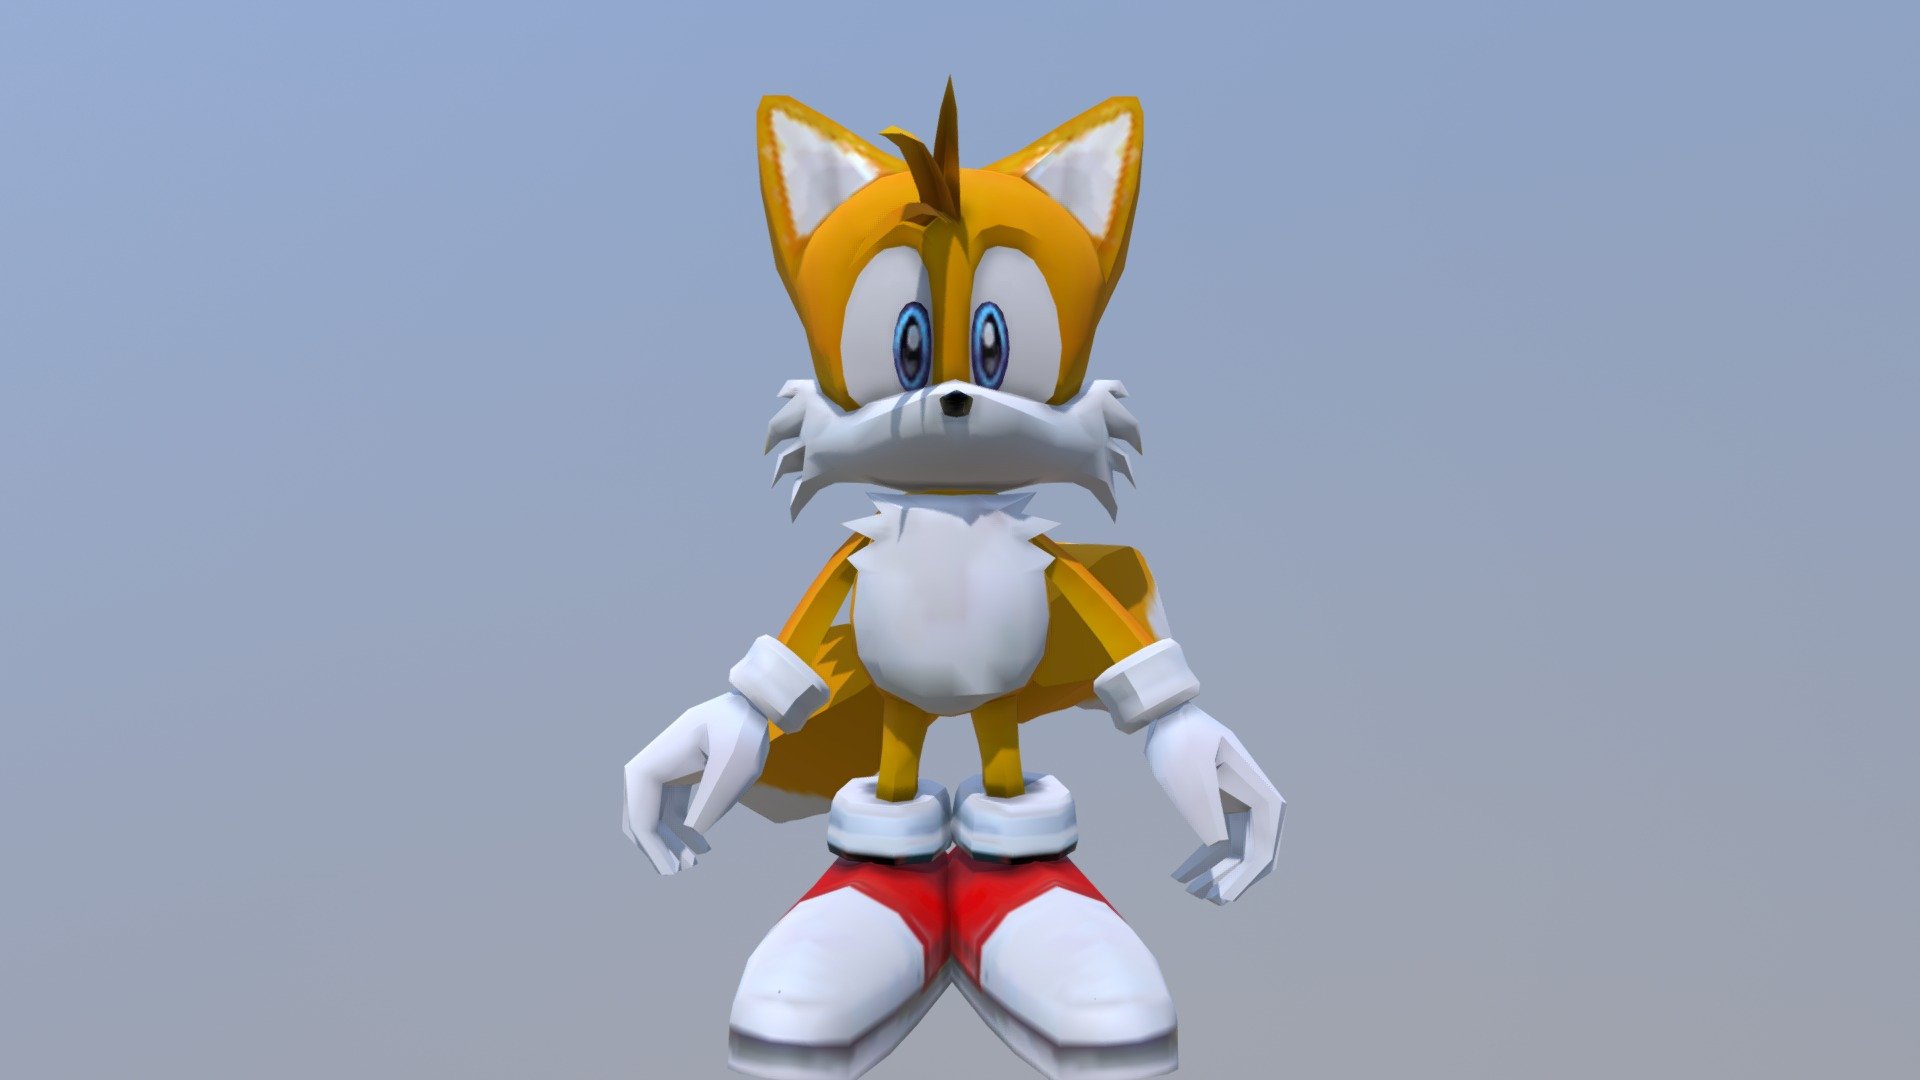 S2 Style Super Tails in Sonic 2 : Free Download, Borrow, and